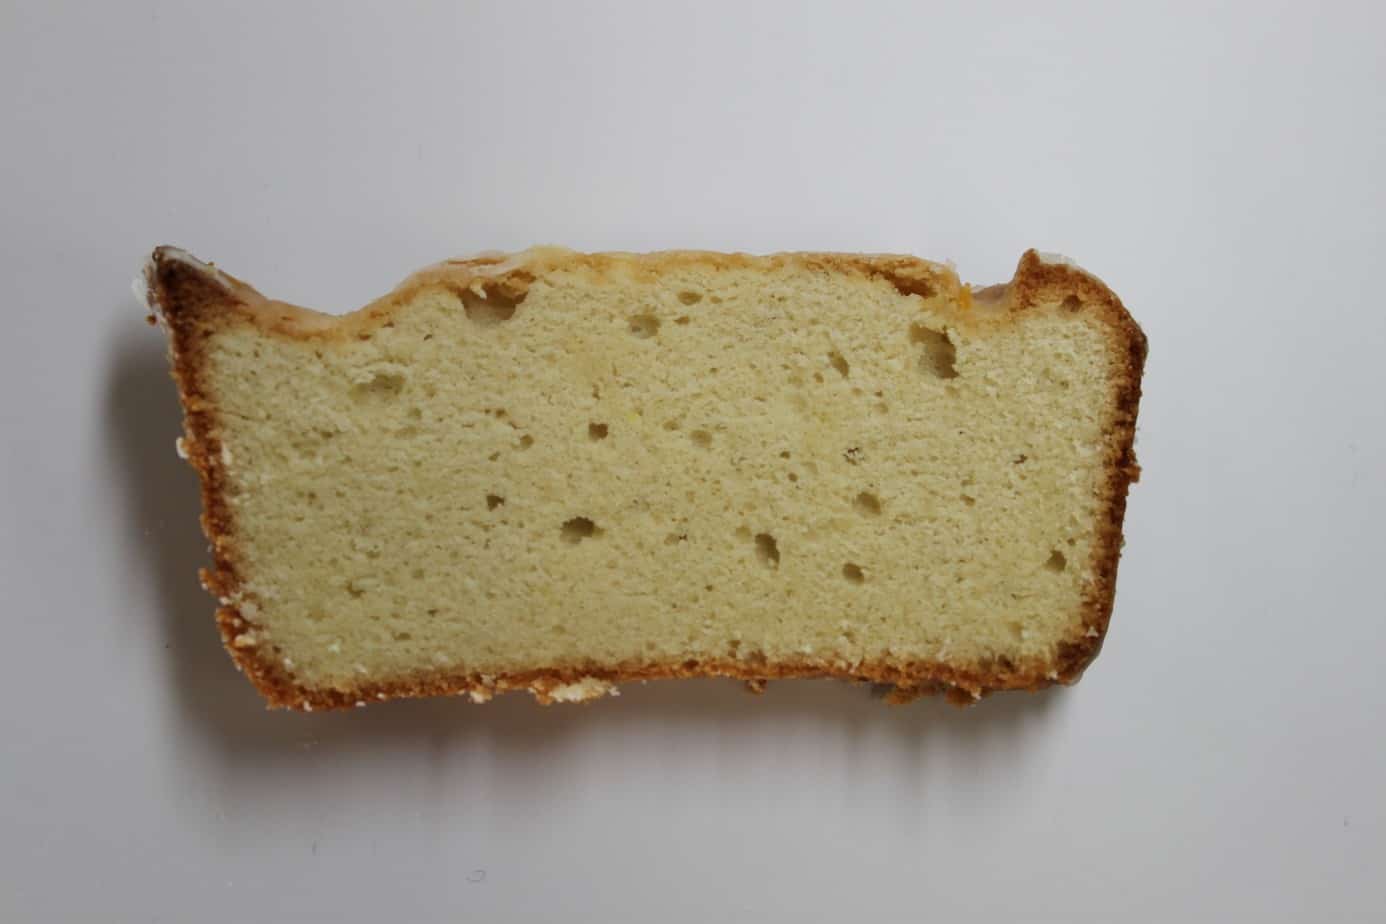 slice of a basic pound cake made from scratch